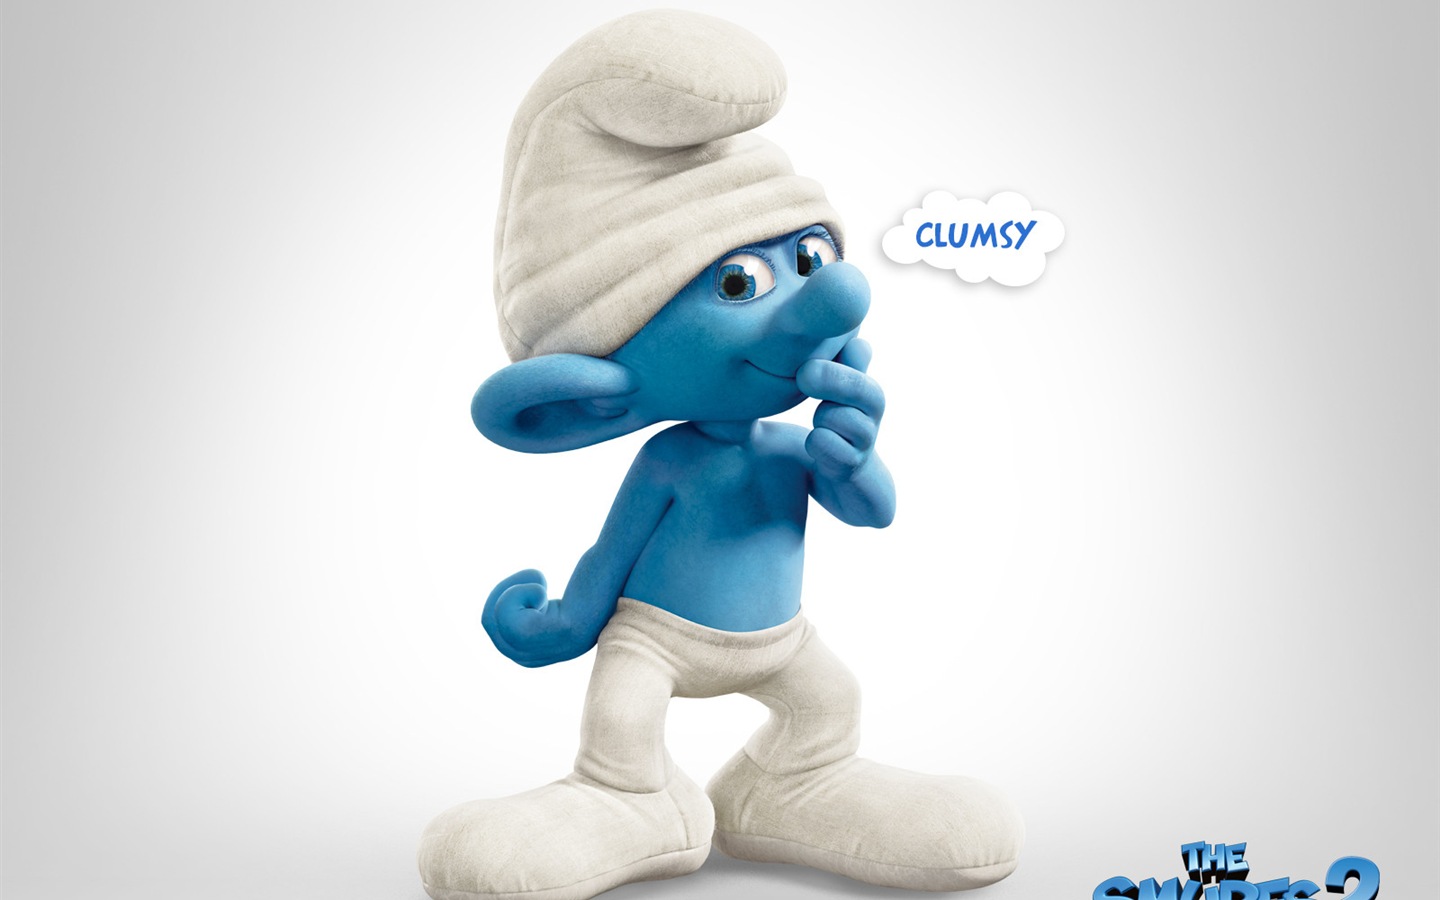 The Smurfs 2 HD movie wallpapers #8 - 1440x900